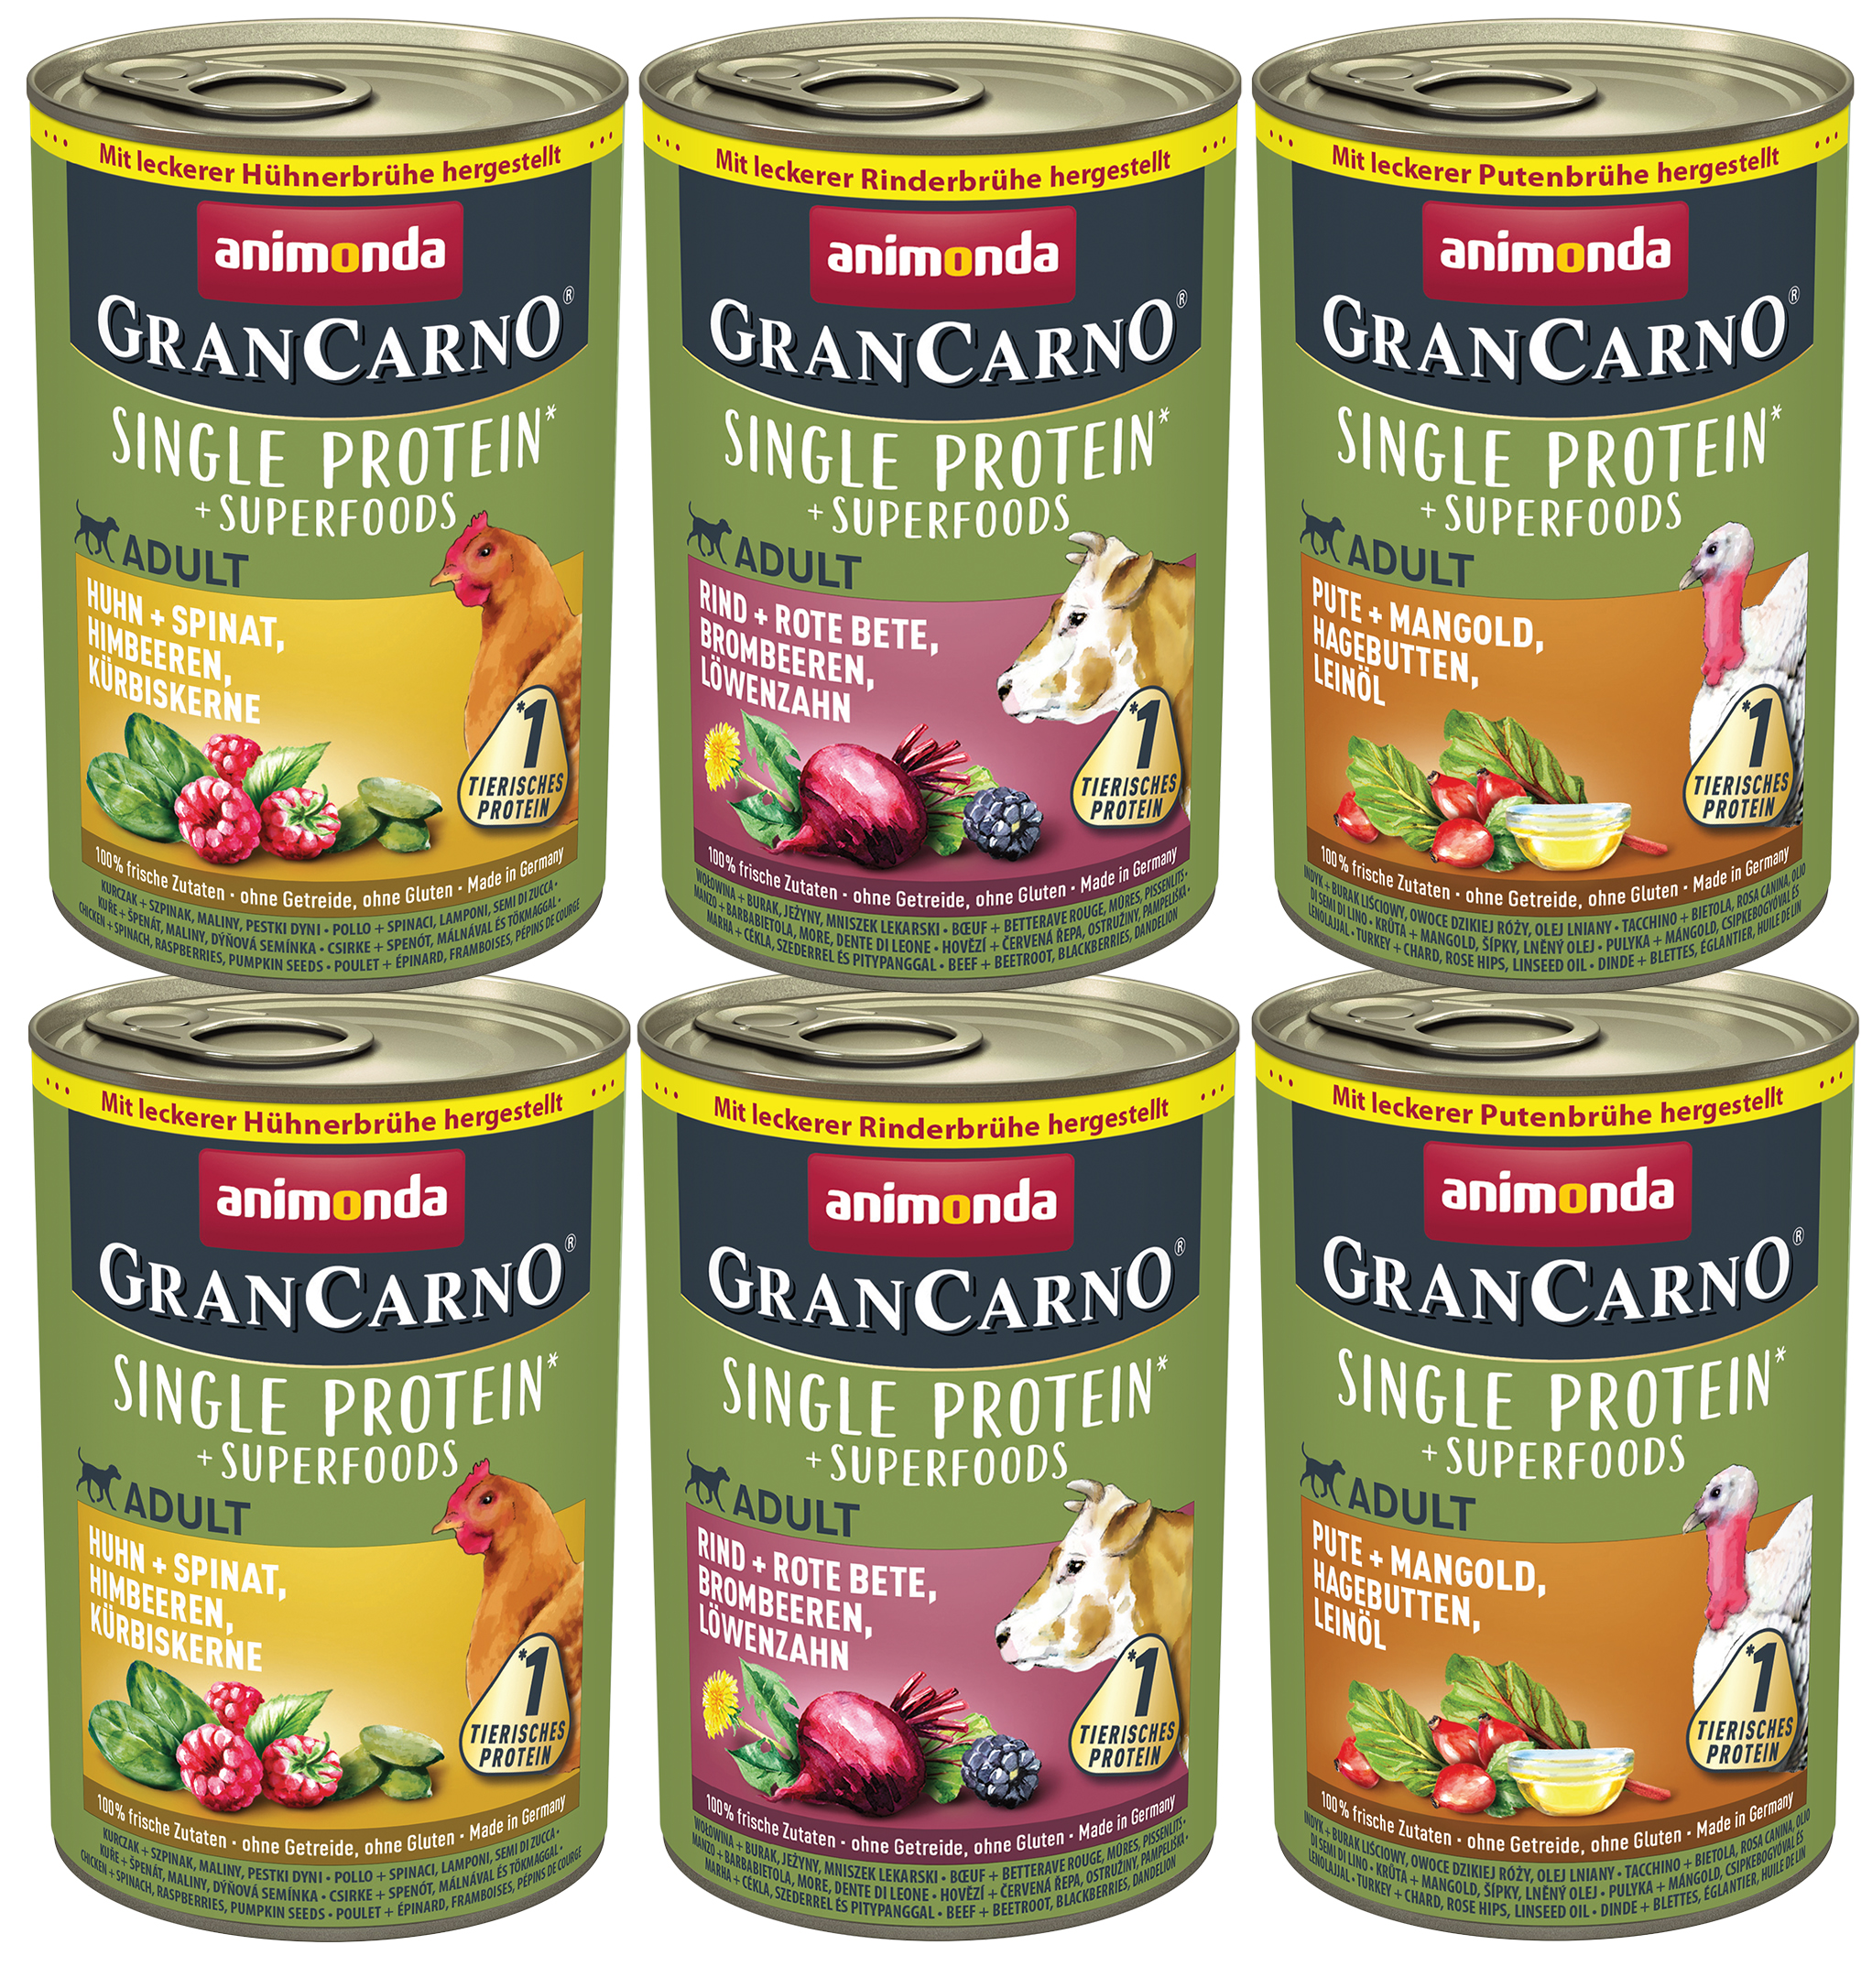 GranCarno variety Superfoods